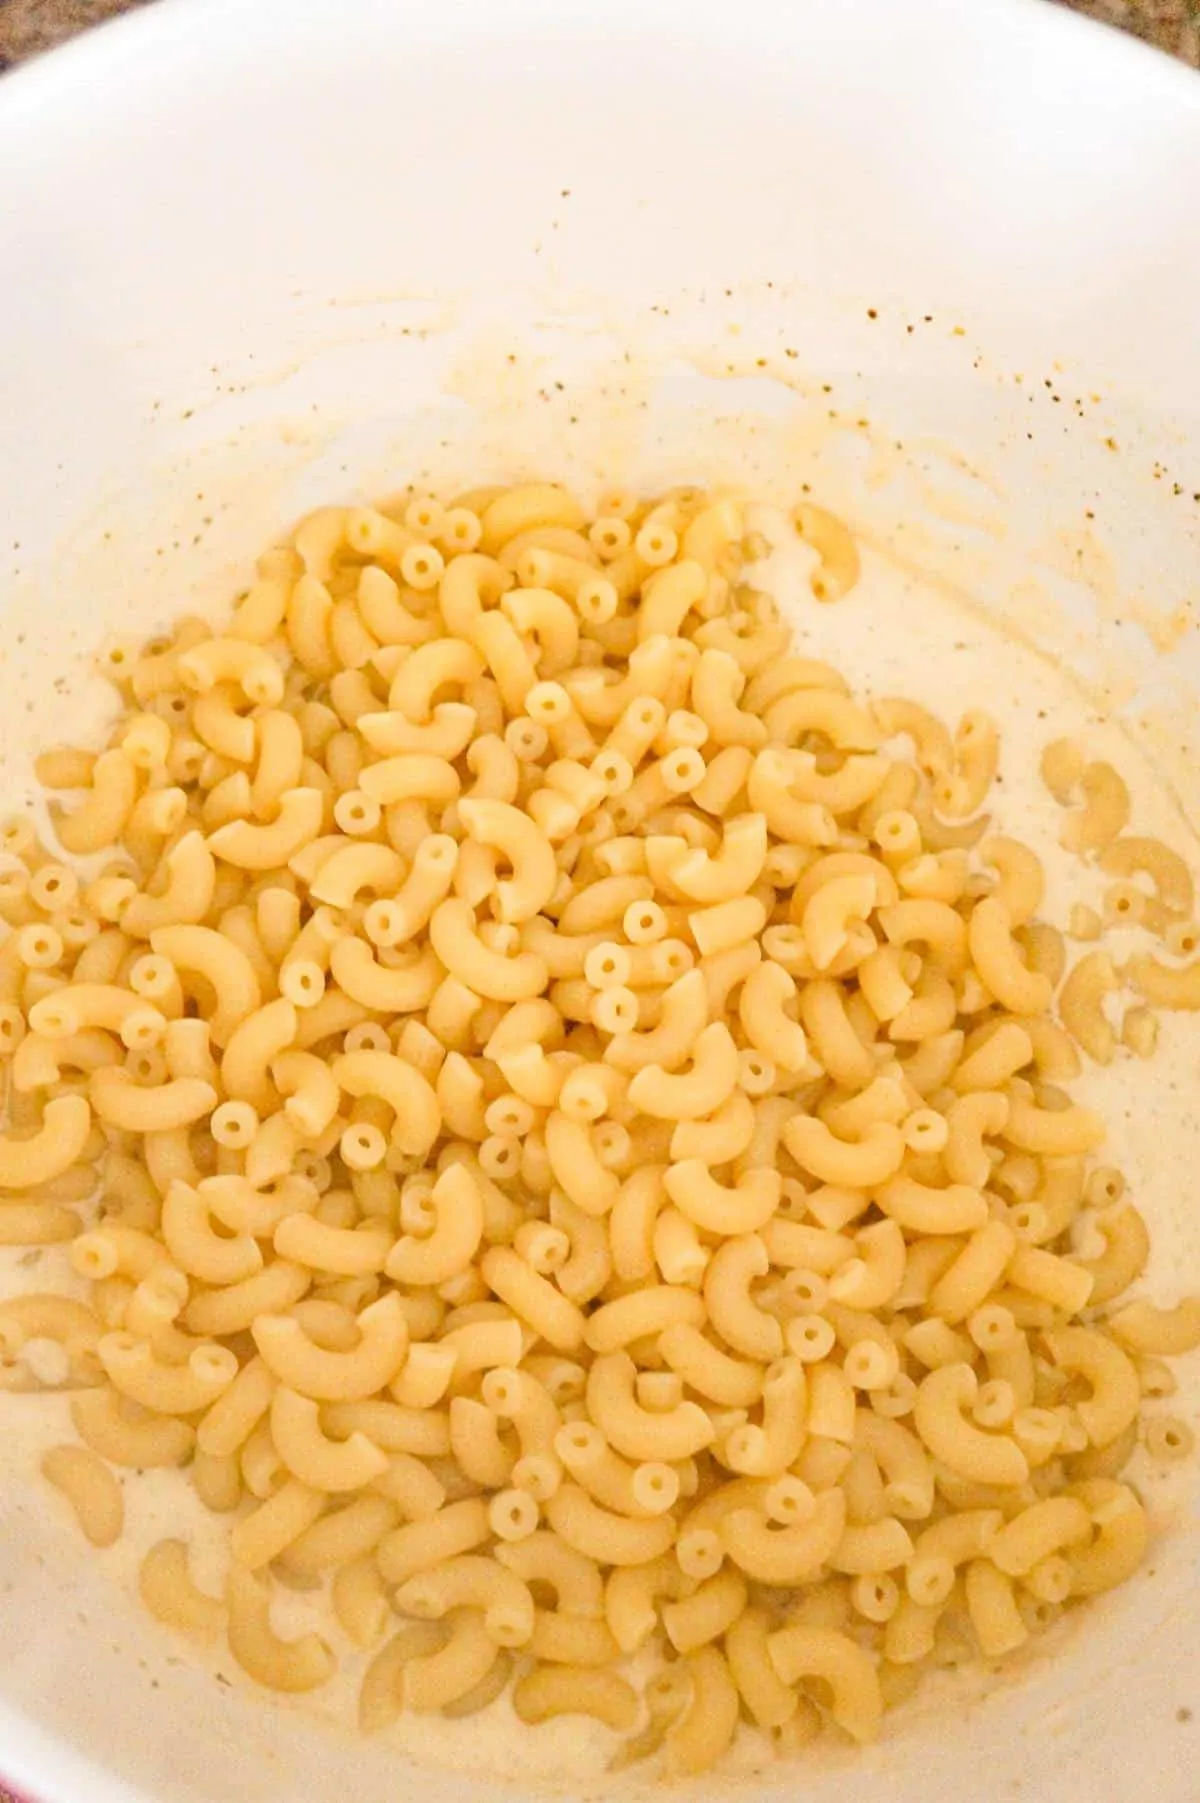 cooked macaroni noodles on top of creamy sauce mixture in a mixing bowl